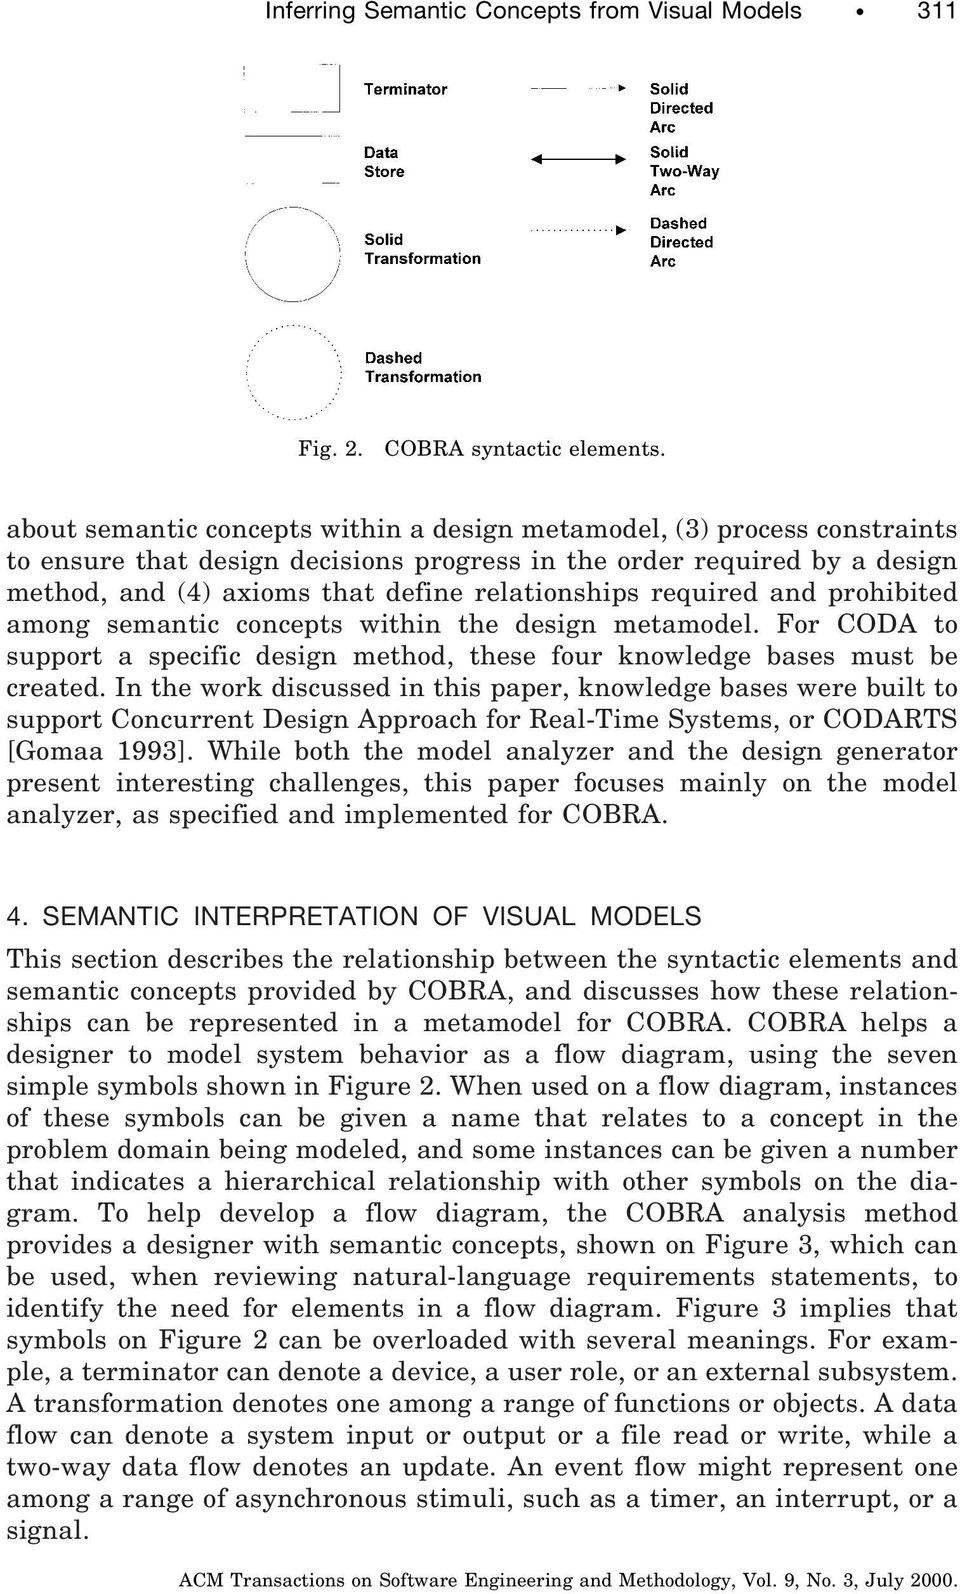 required and prohibited among semantic concepts within the design metamodel. For CODA to support a specific design method, these four knowledge bases must be created.